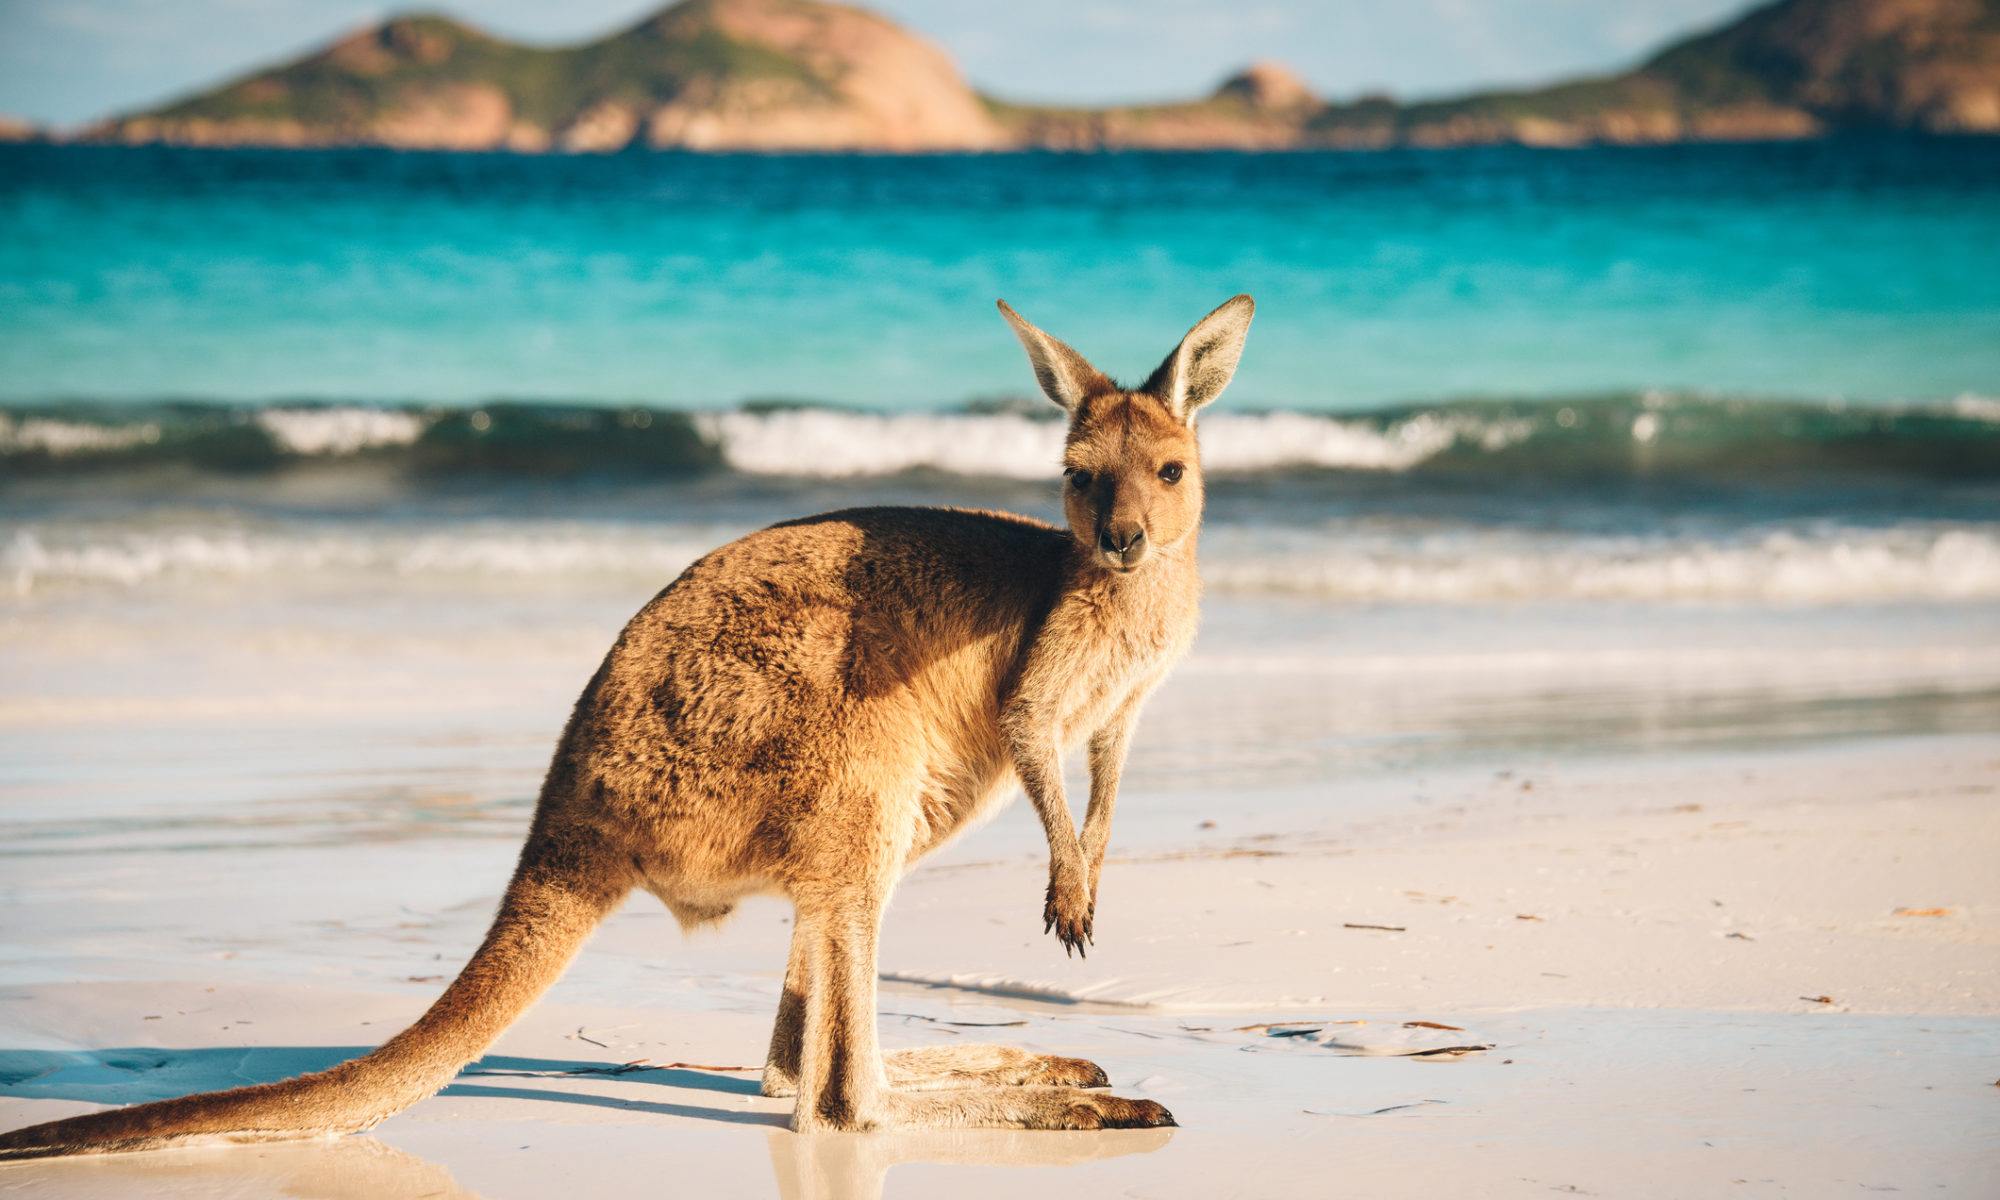 Asia is the future of Australia’s inbound tourism, not just China